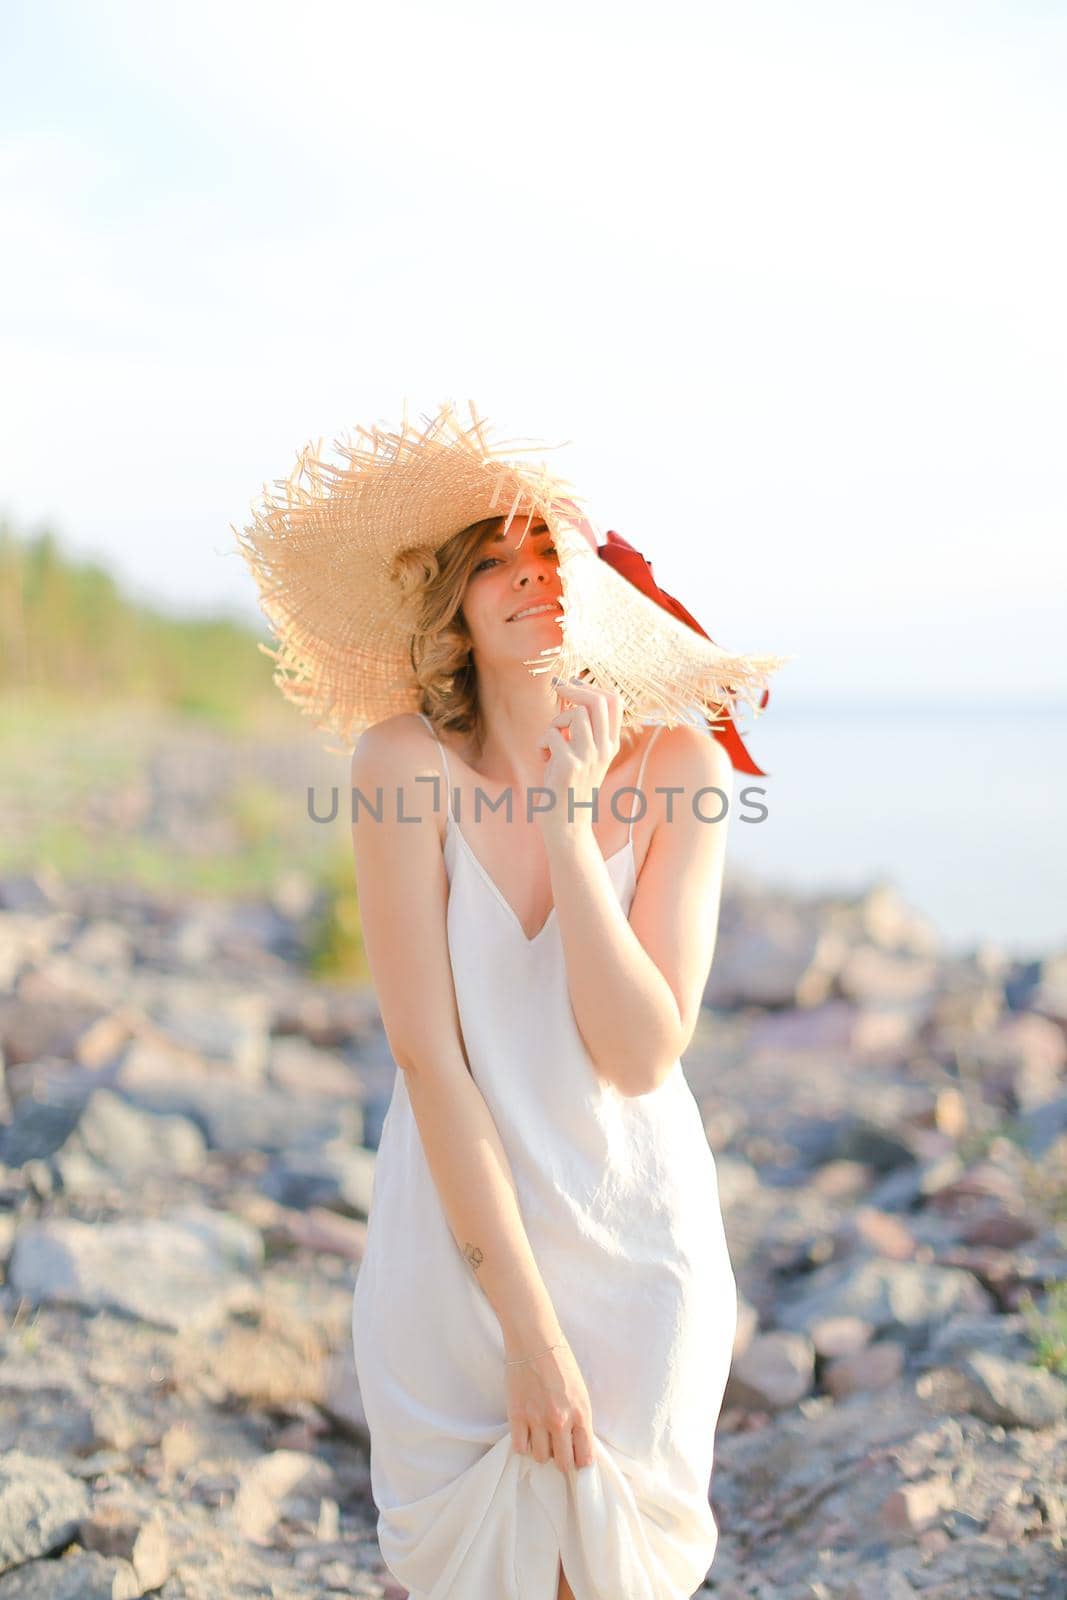 Young happy woman in hat with red ribbon standing on shingle beach. Concept of summer vacations and resort.